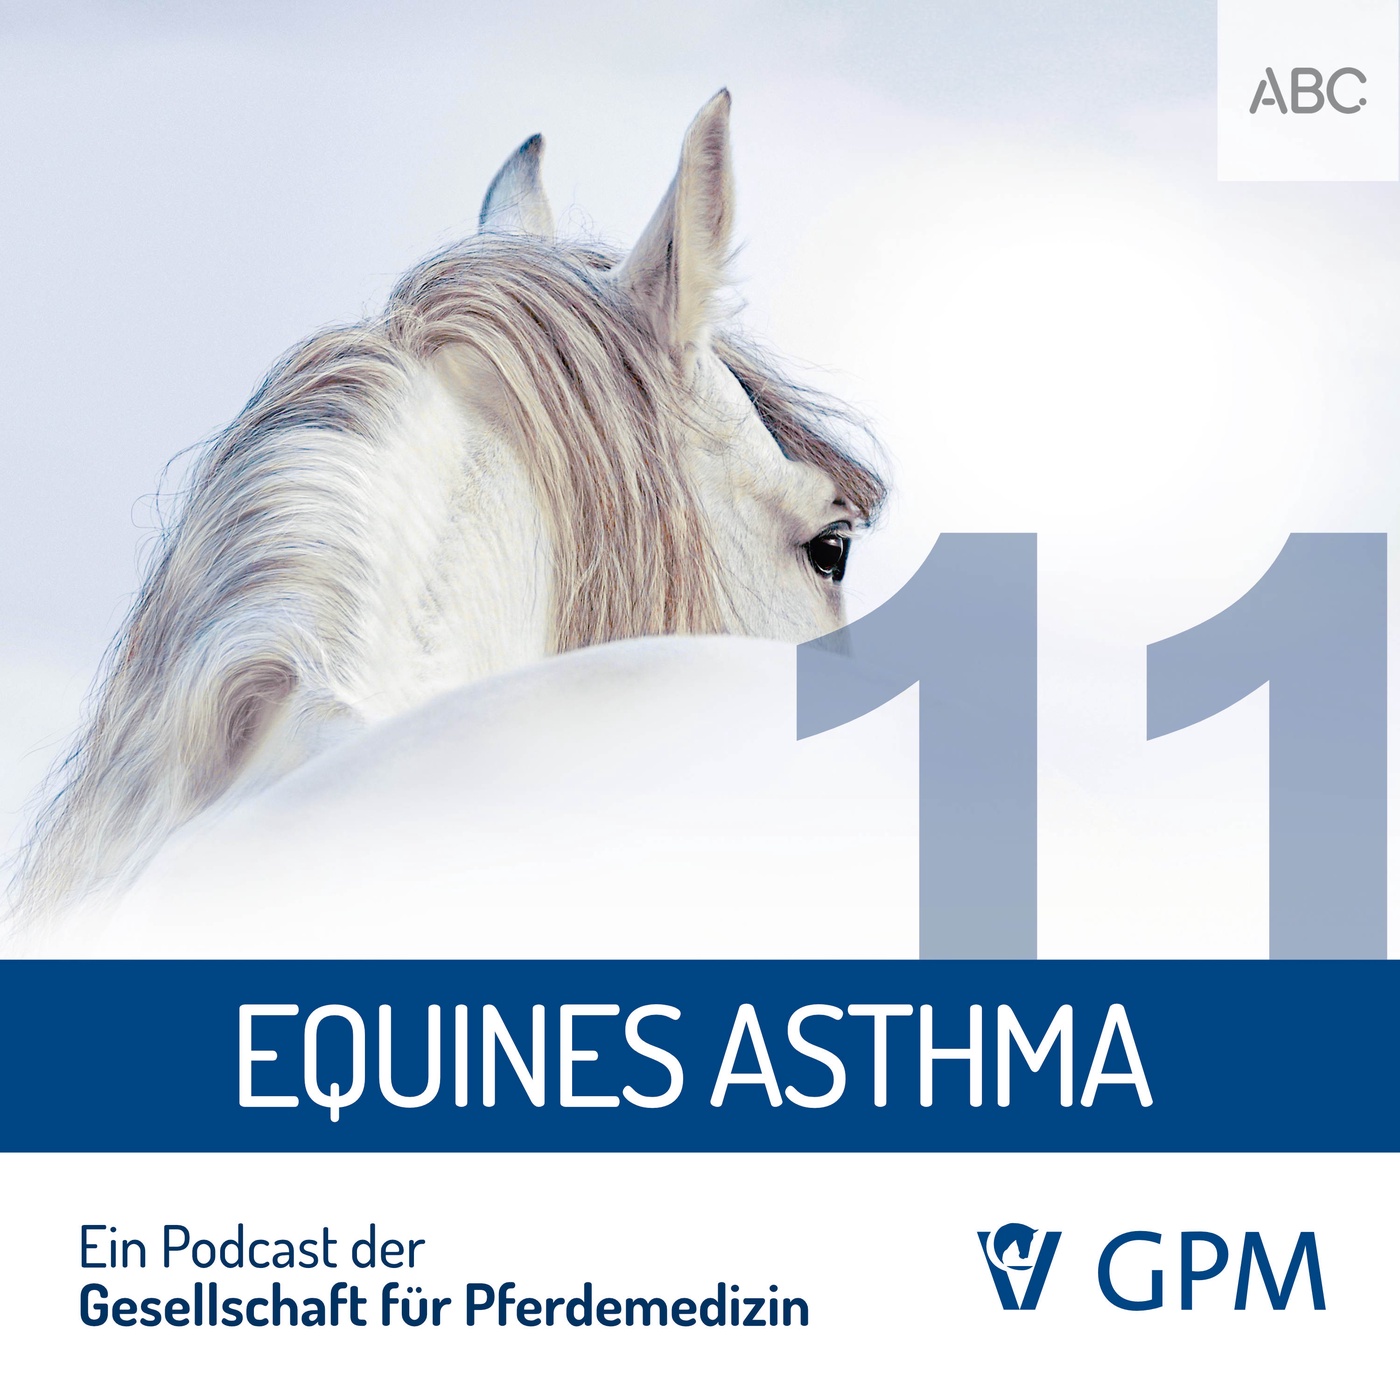 Equines Asthma